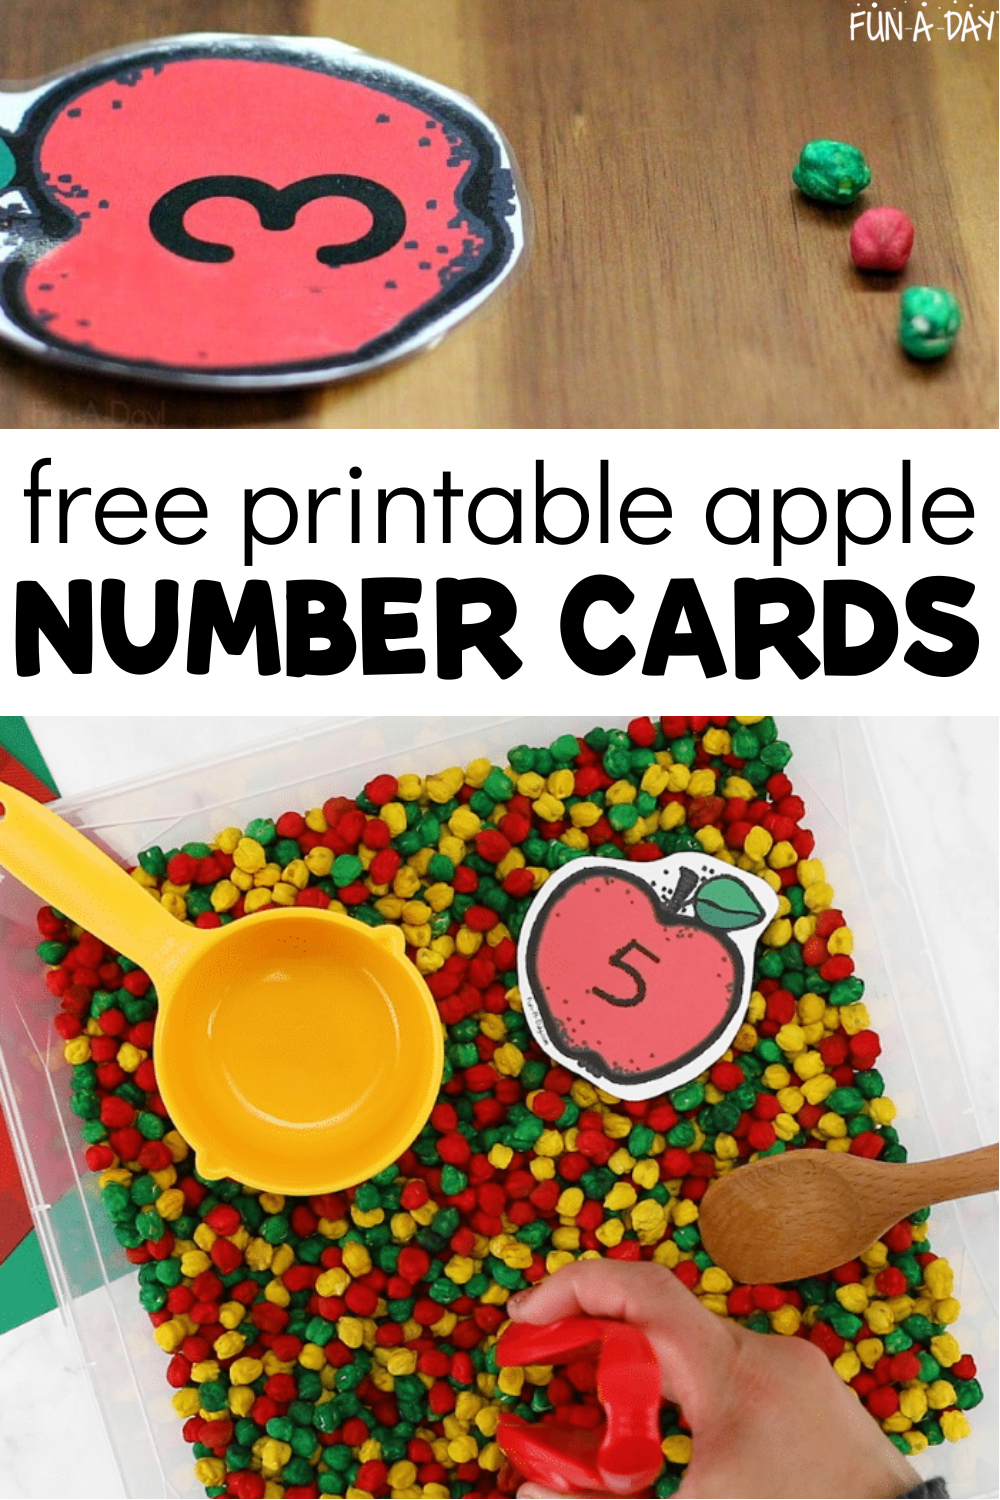 Printable apple number cards paired with dyed chickpeas in math and sensory play, with text that reads free printable apple number cards